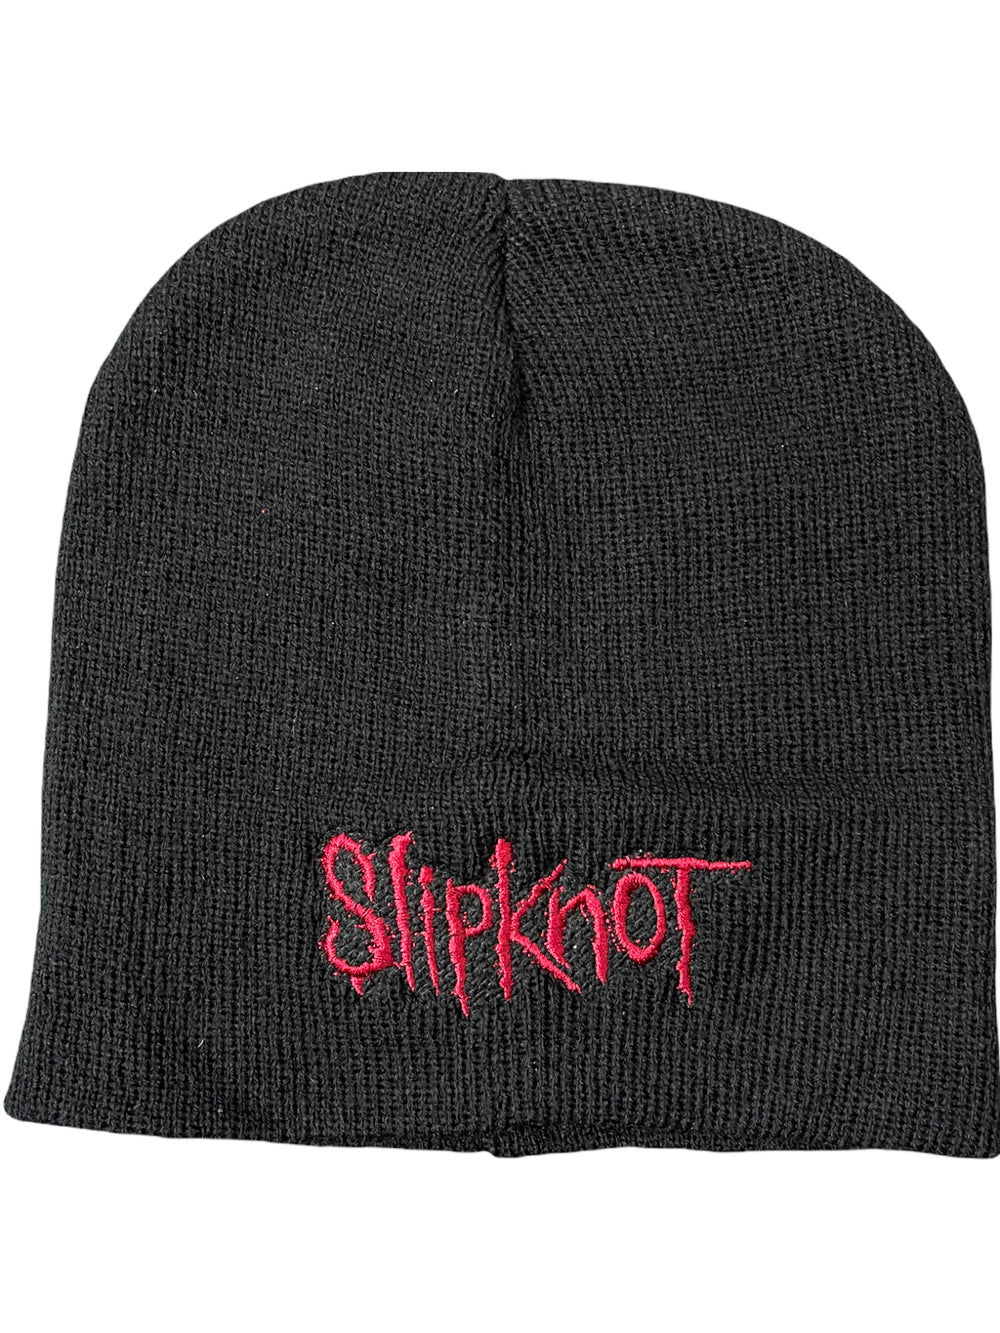 Slipknot - Red Logo Embroidery Official Beanie Hat One Size Fits All NEW